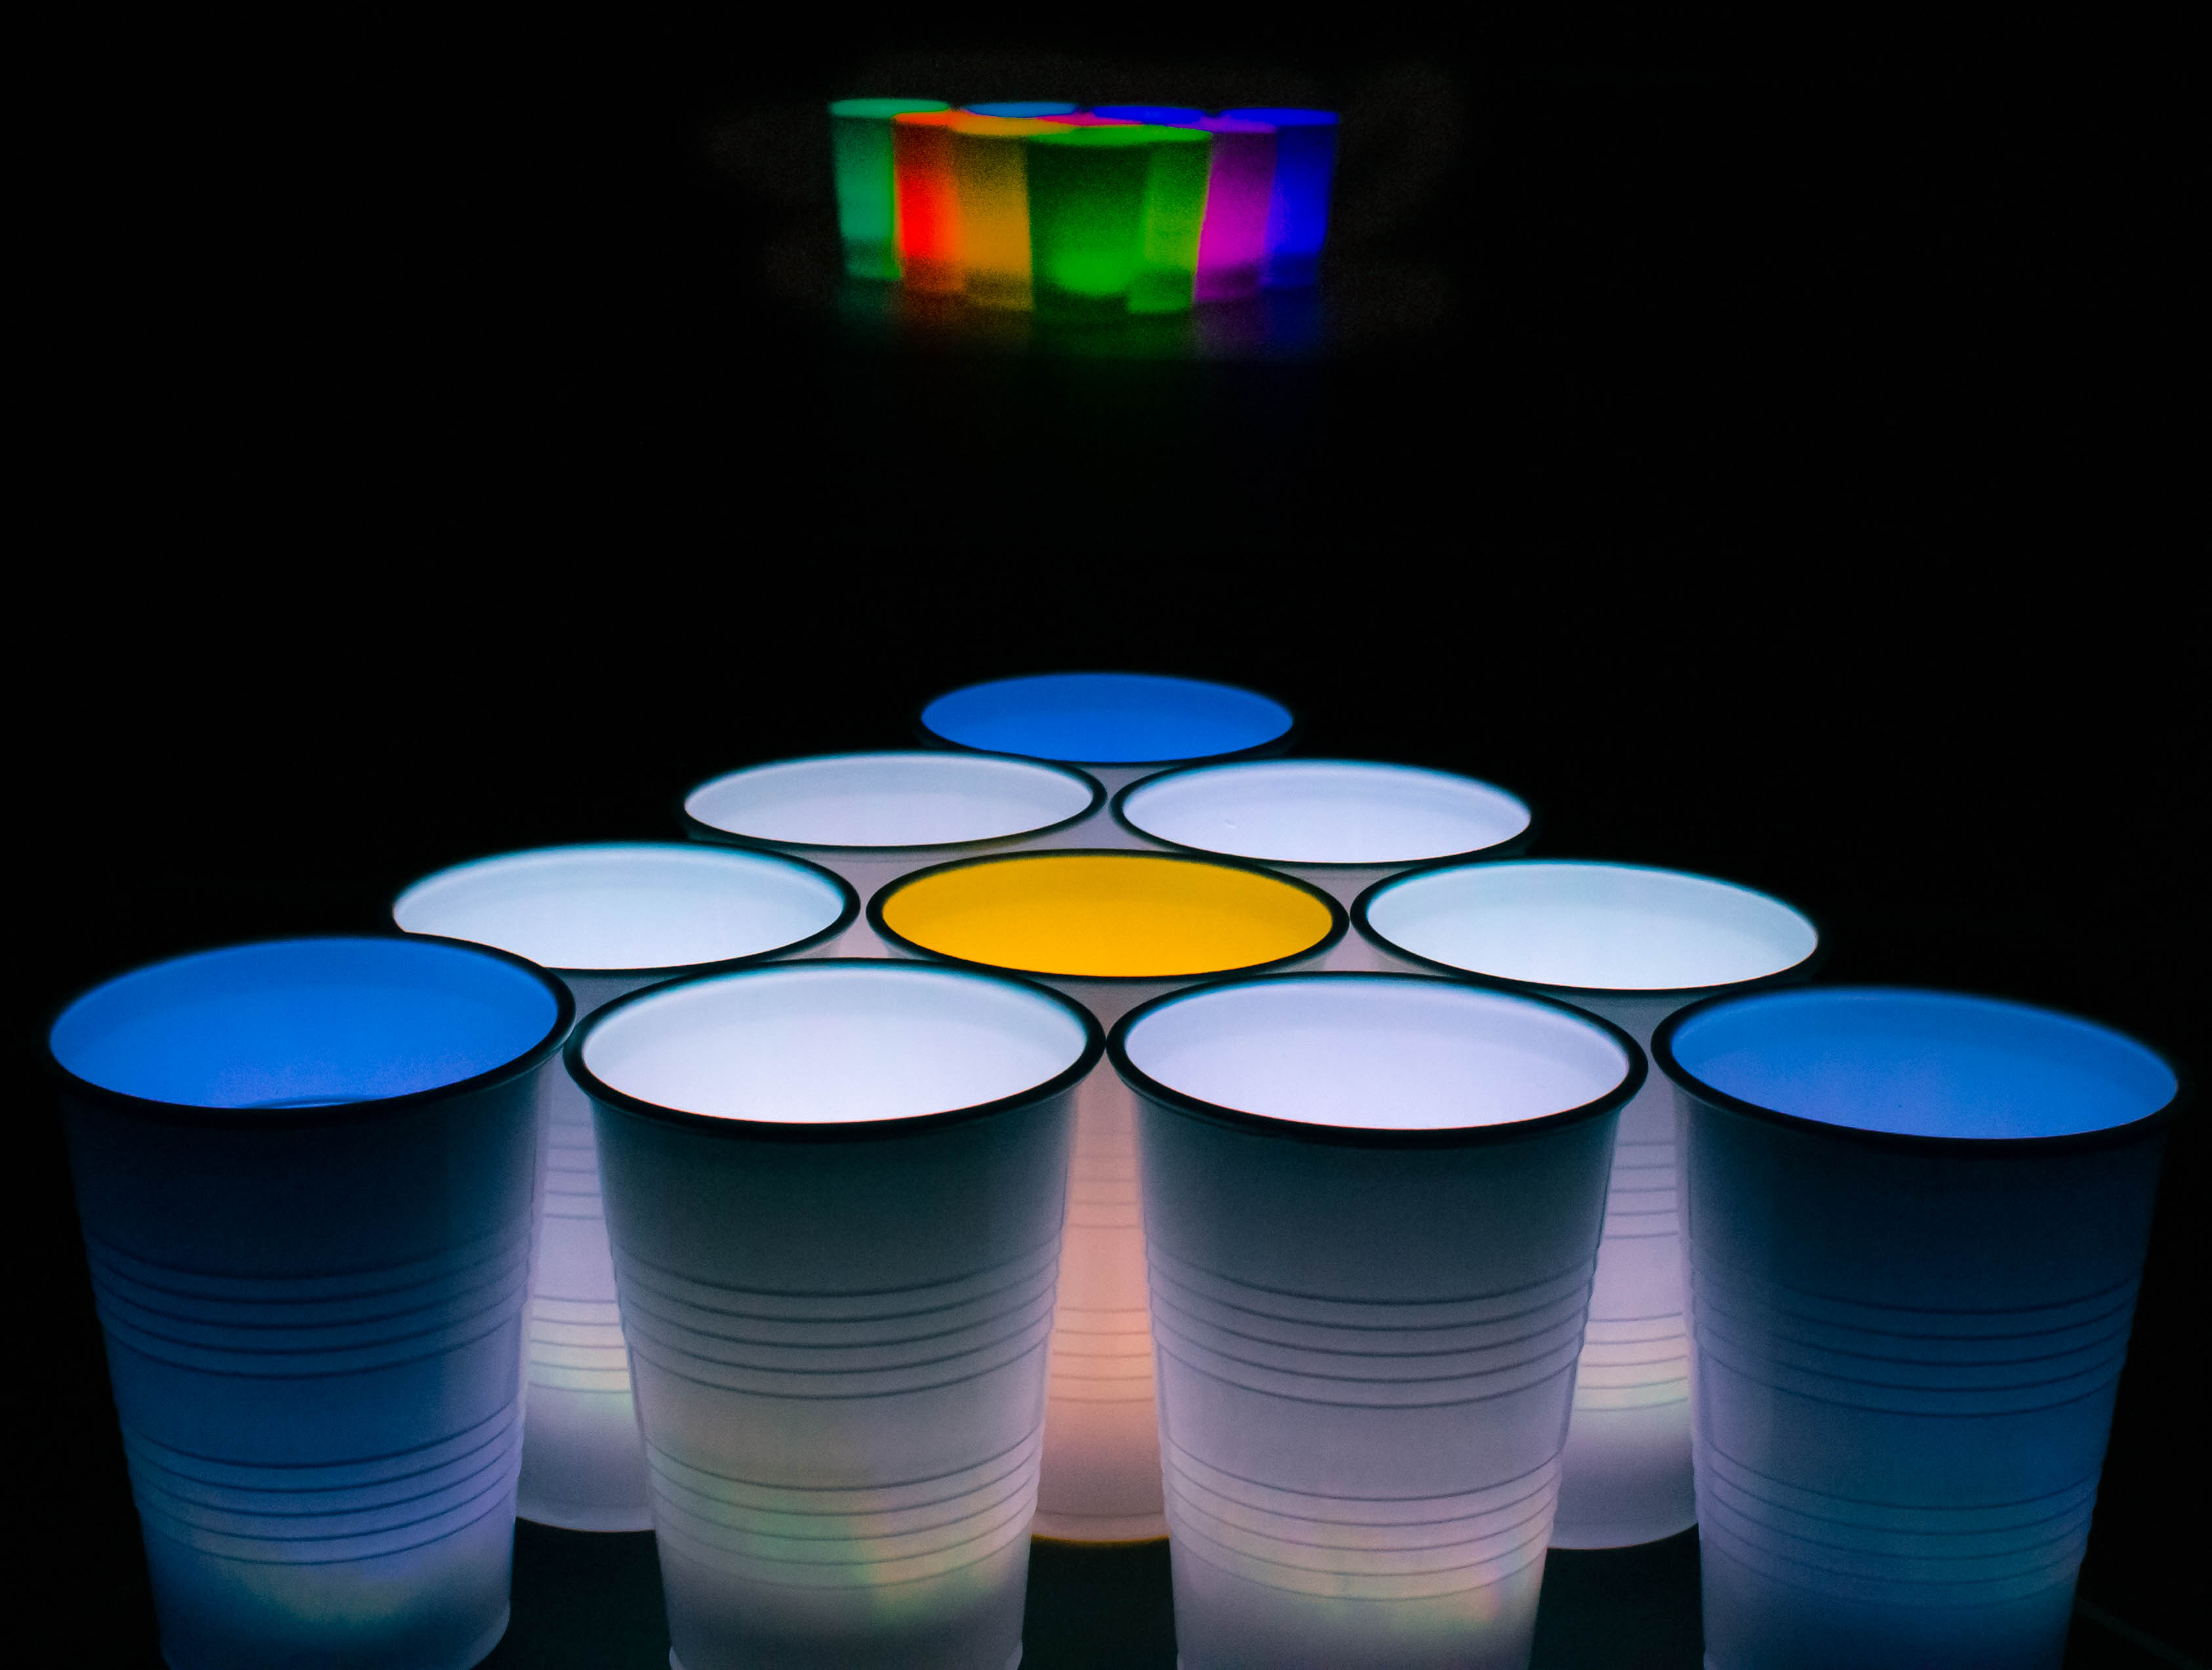 LED Beer Pong – Vancouver PartyWorks